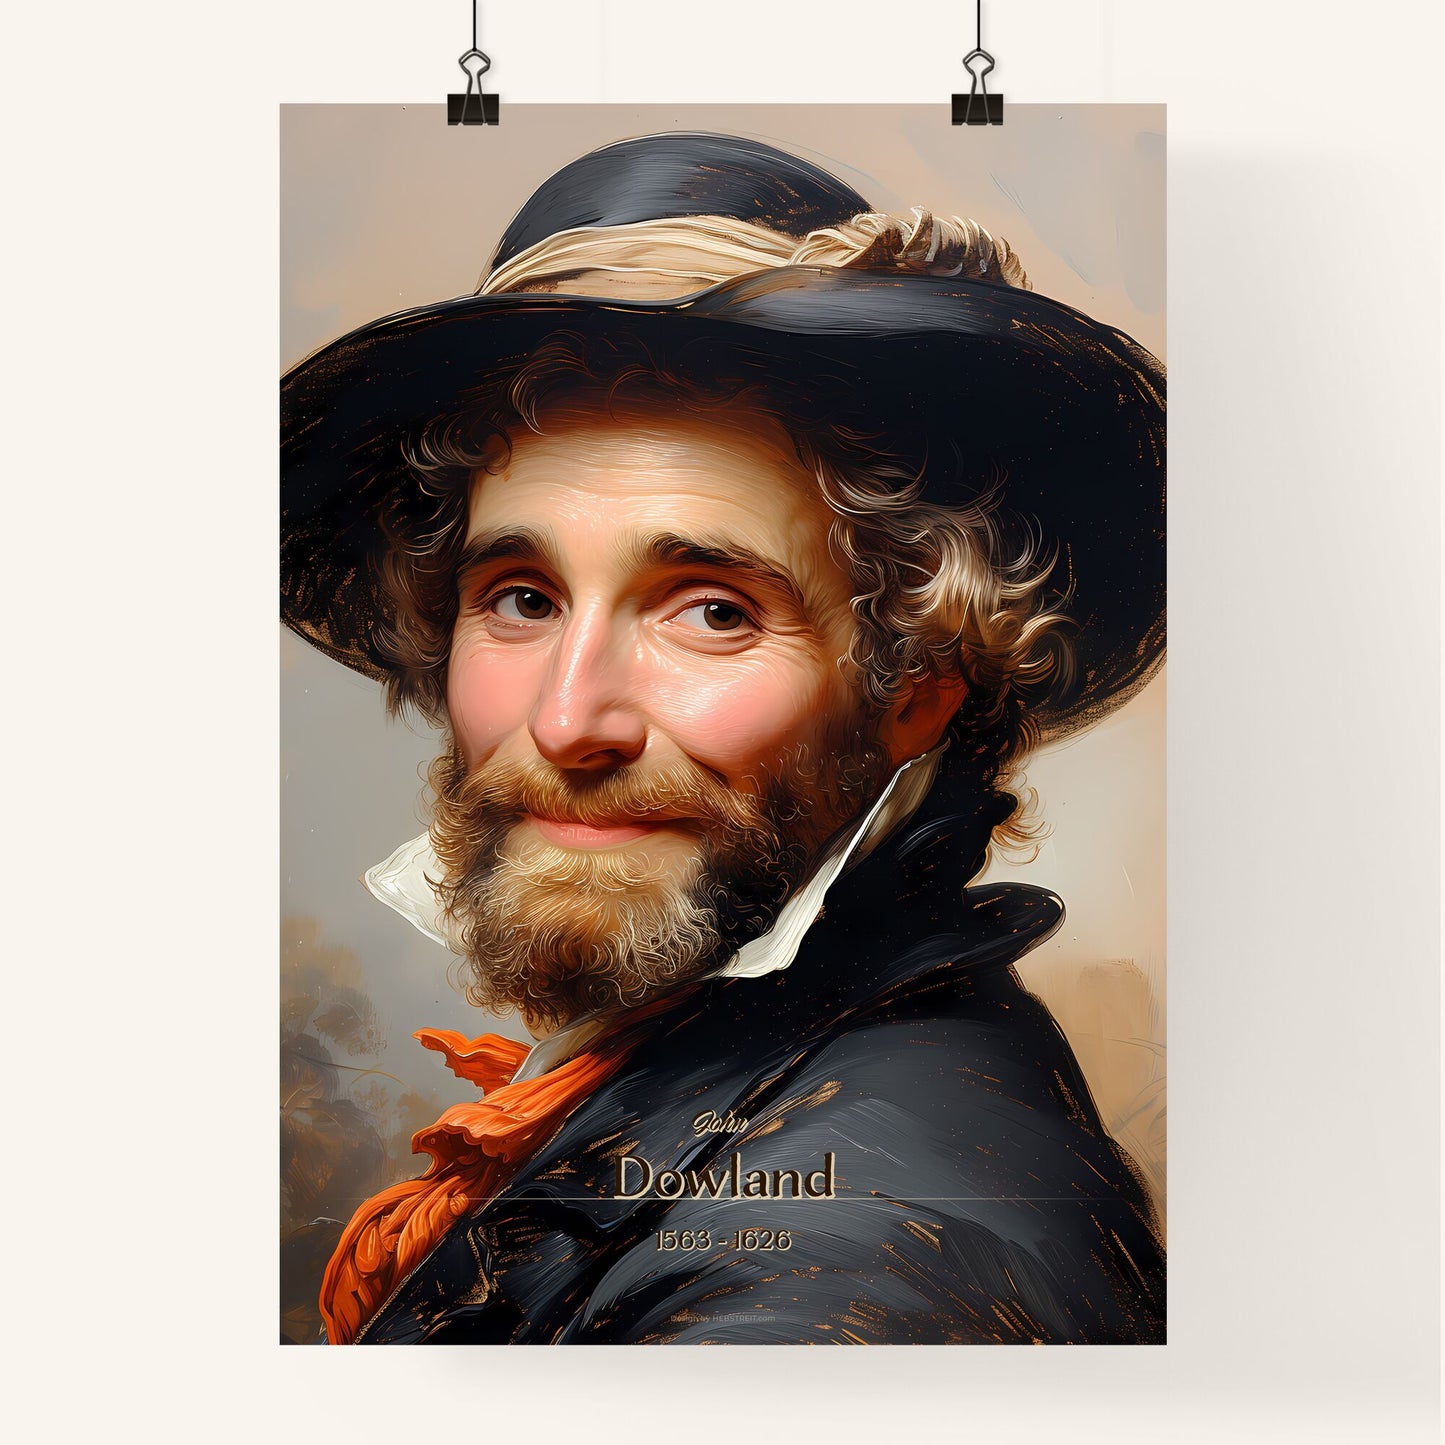 John, Dowland, 1563 - 1626, A Poster of a man with a hat Default Title